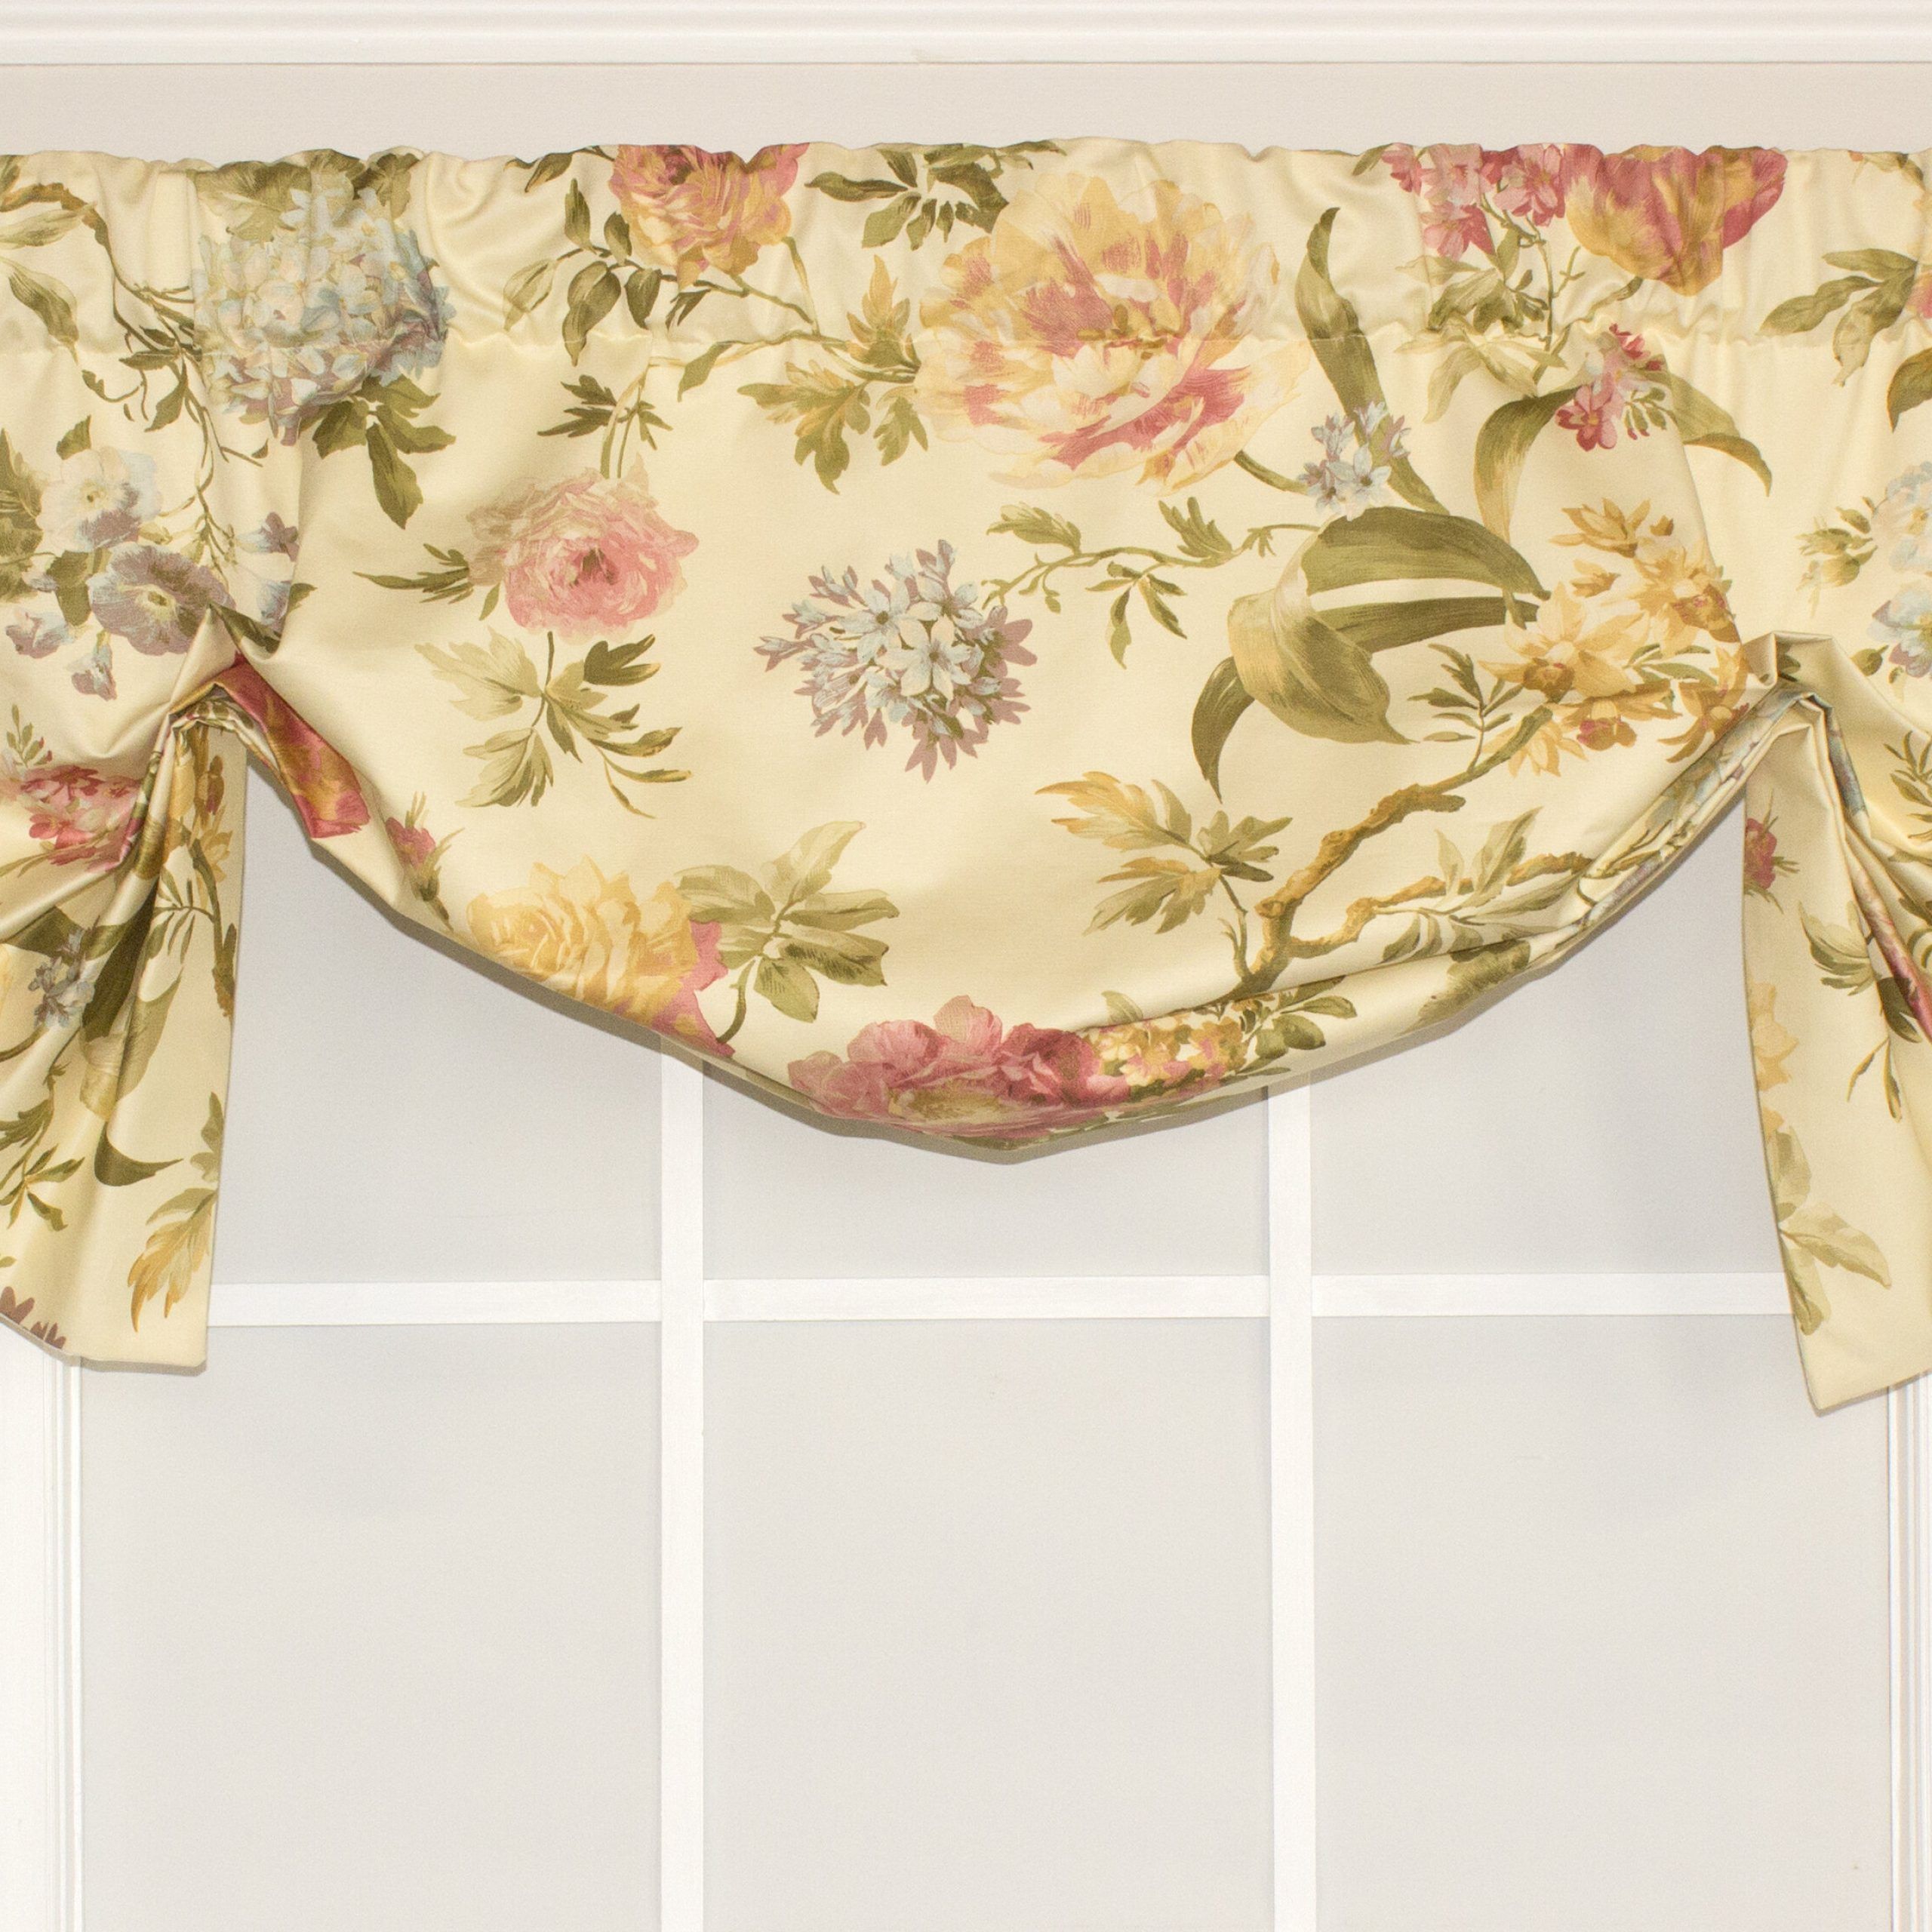 Casa Di Fiori Window Valance Throughout Floral Pattern Window Valances (View 16 of 20)